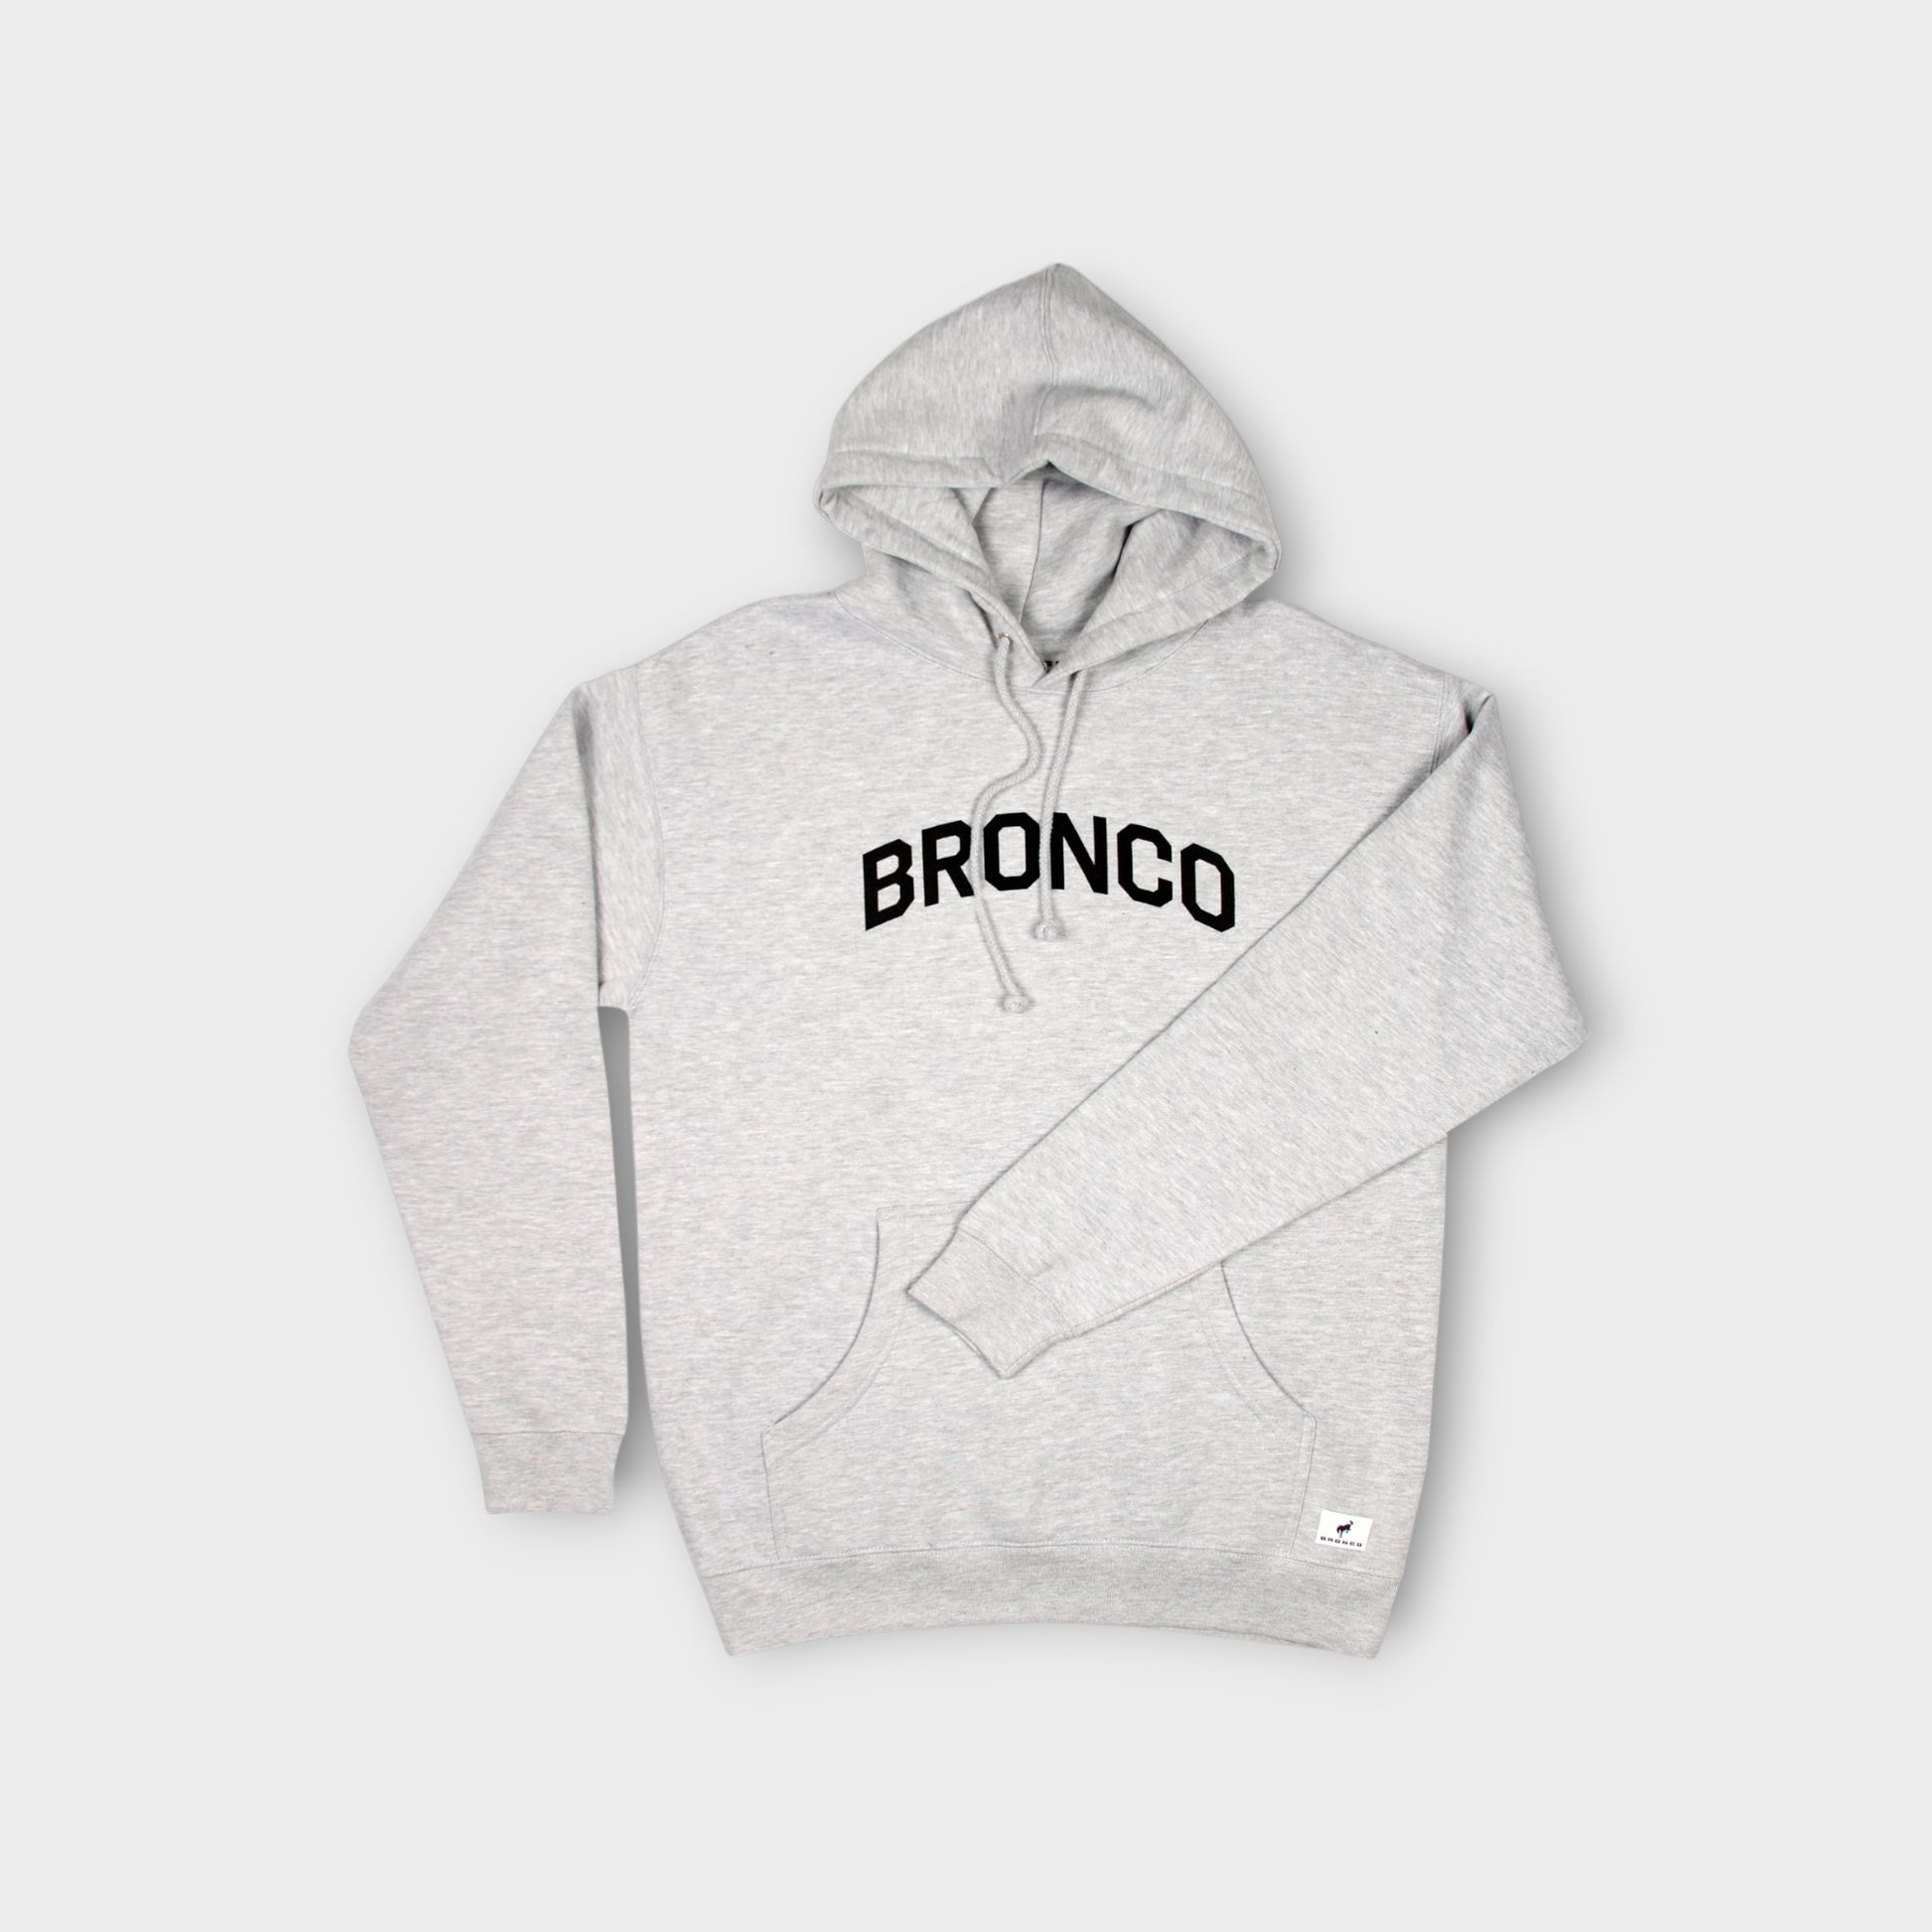 Johnson Valley Hoodie Grey Front